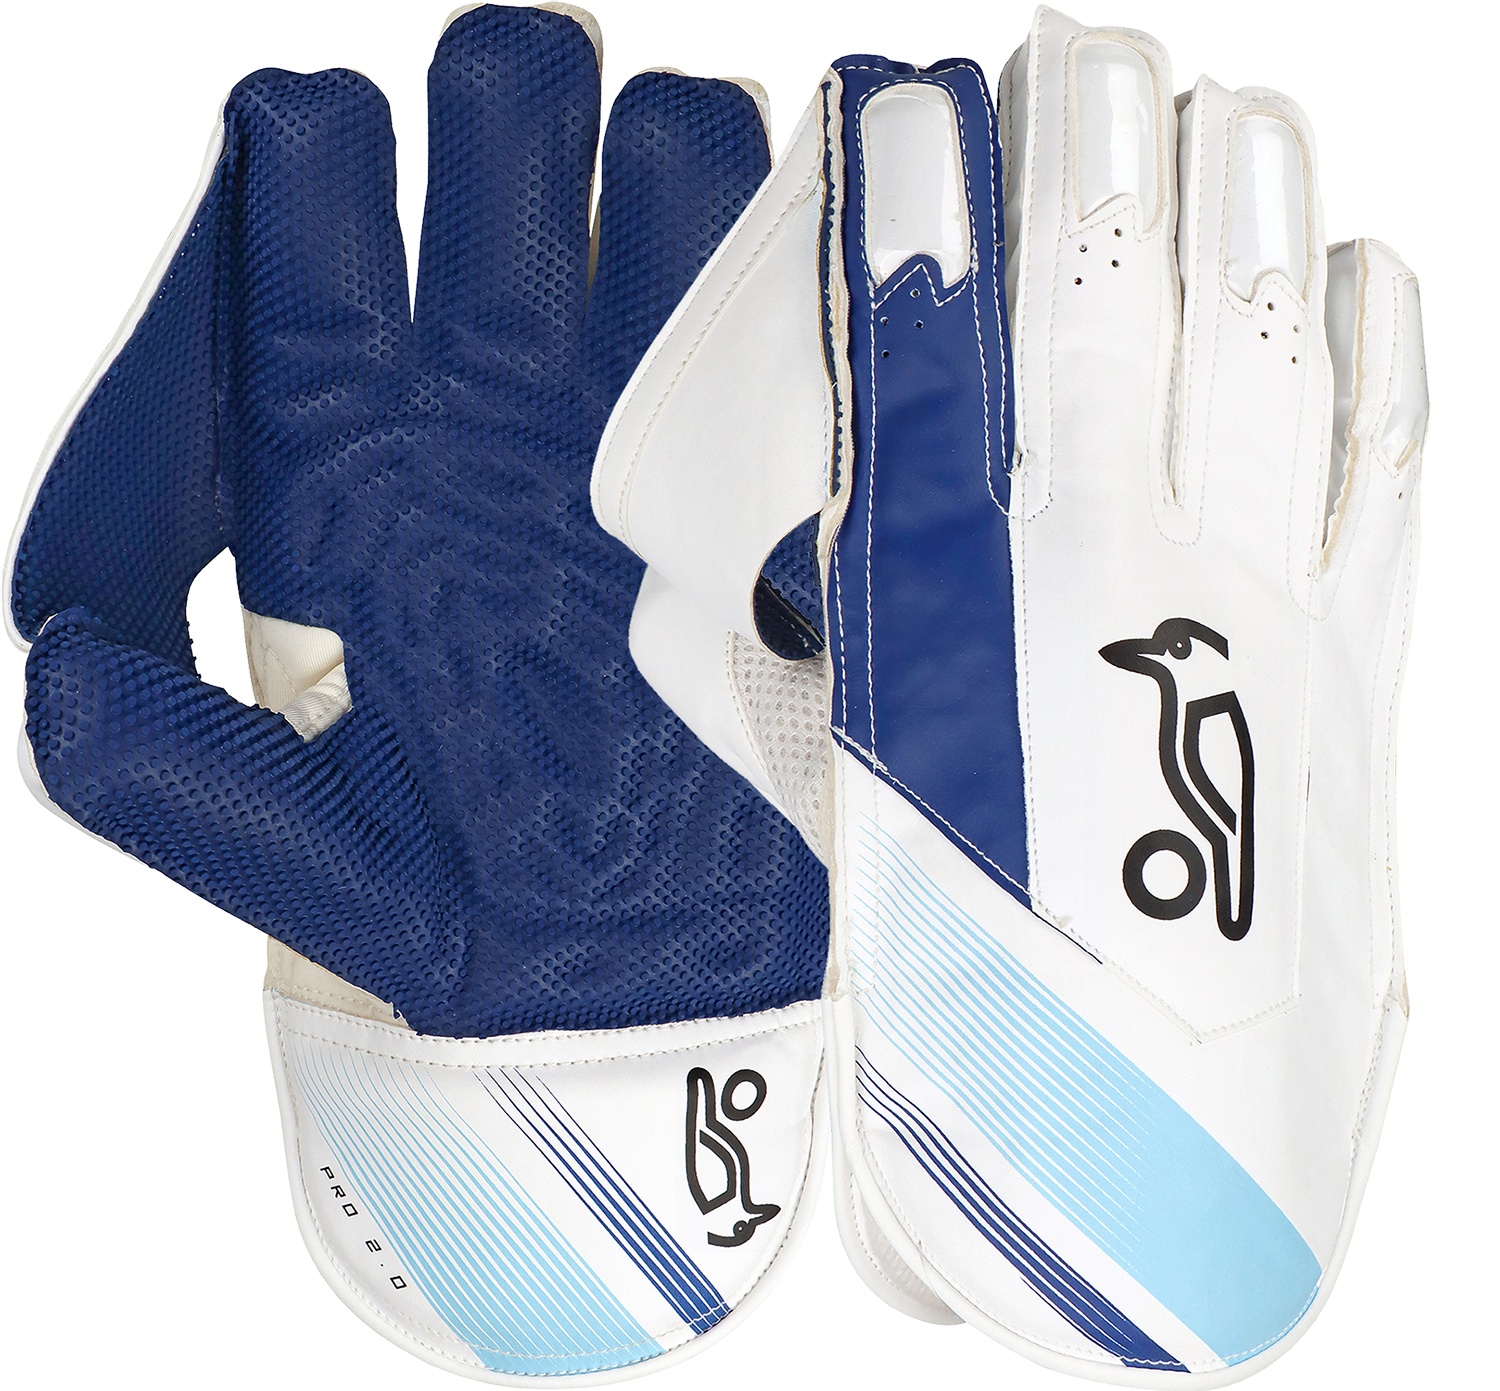 3j13372-pro-2.0-white-blue-wicket-keeping-glove-grouped-1.png